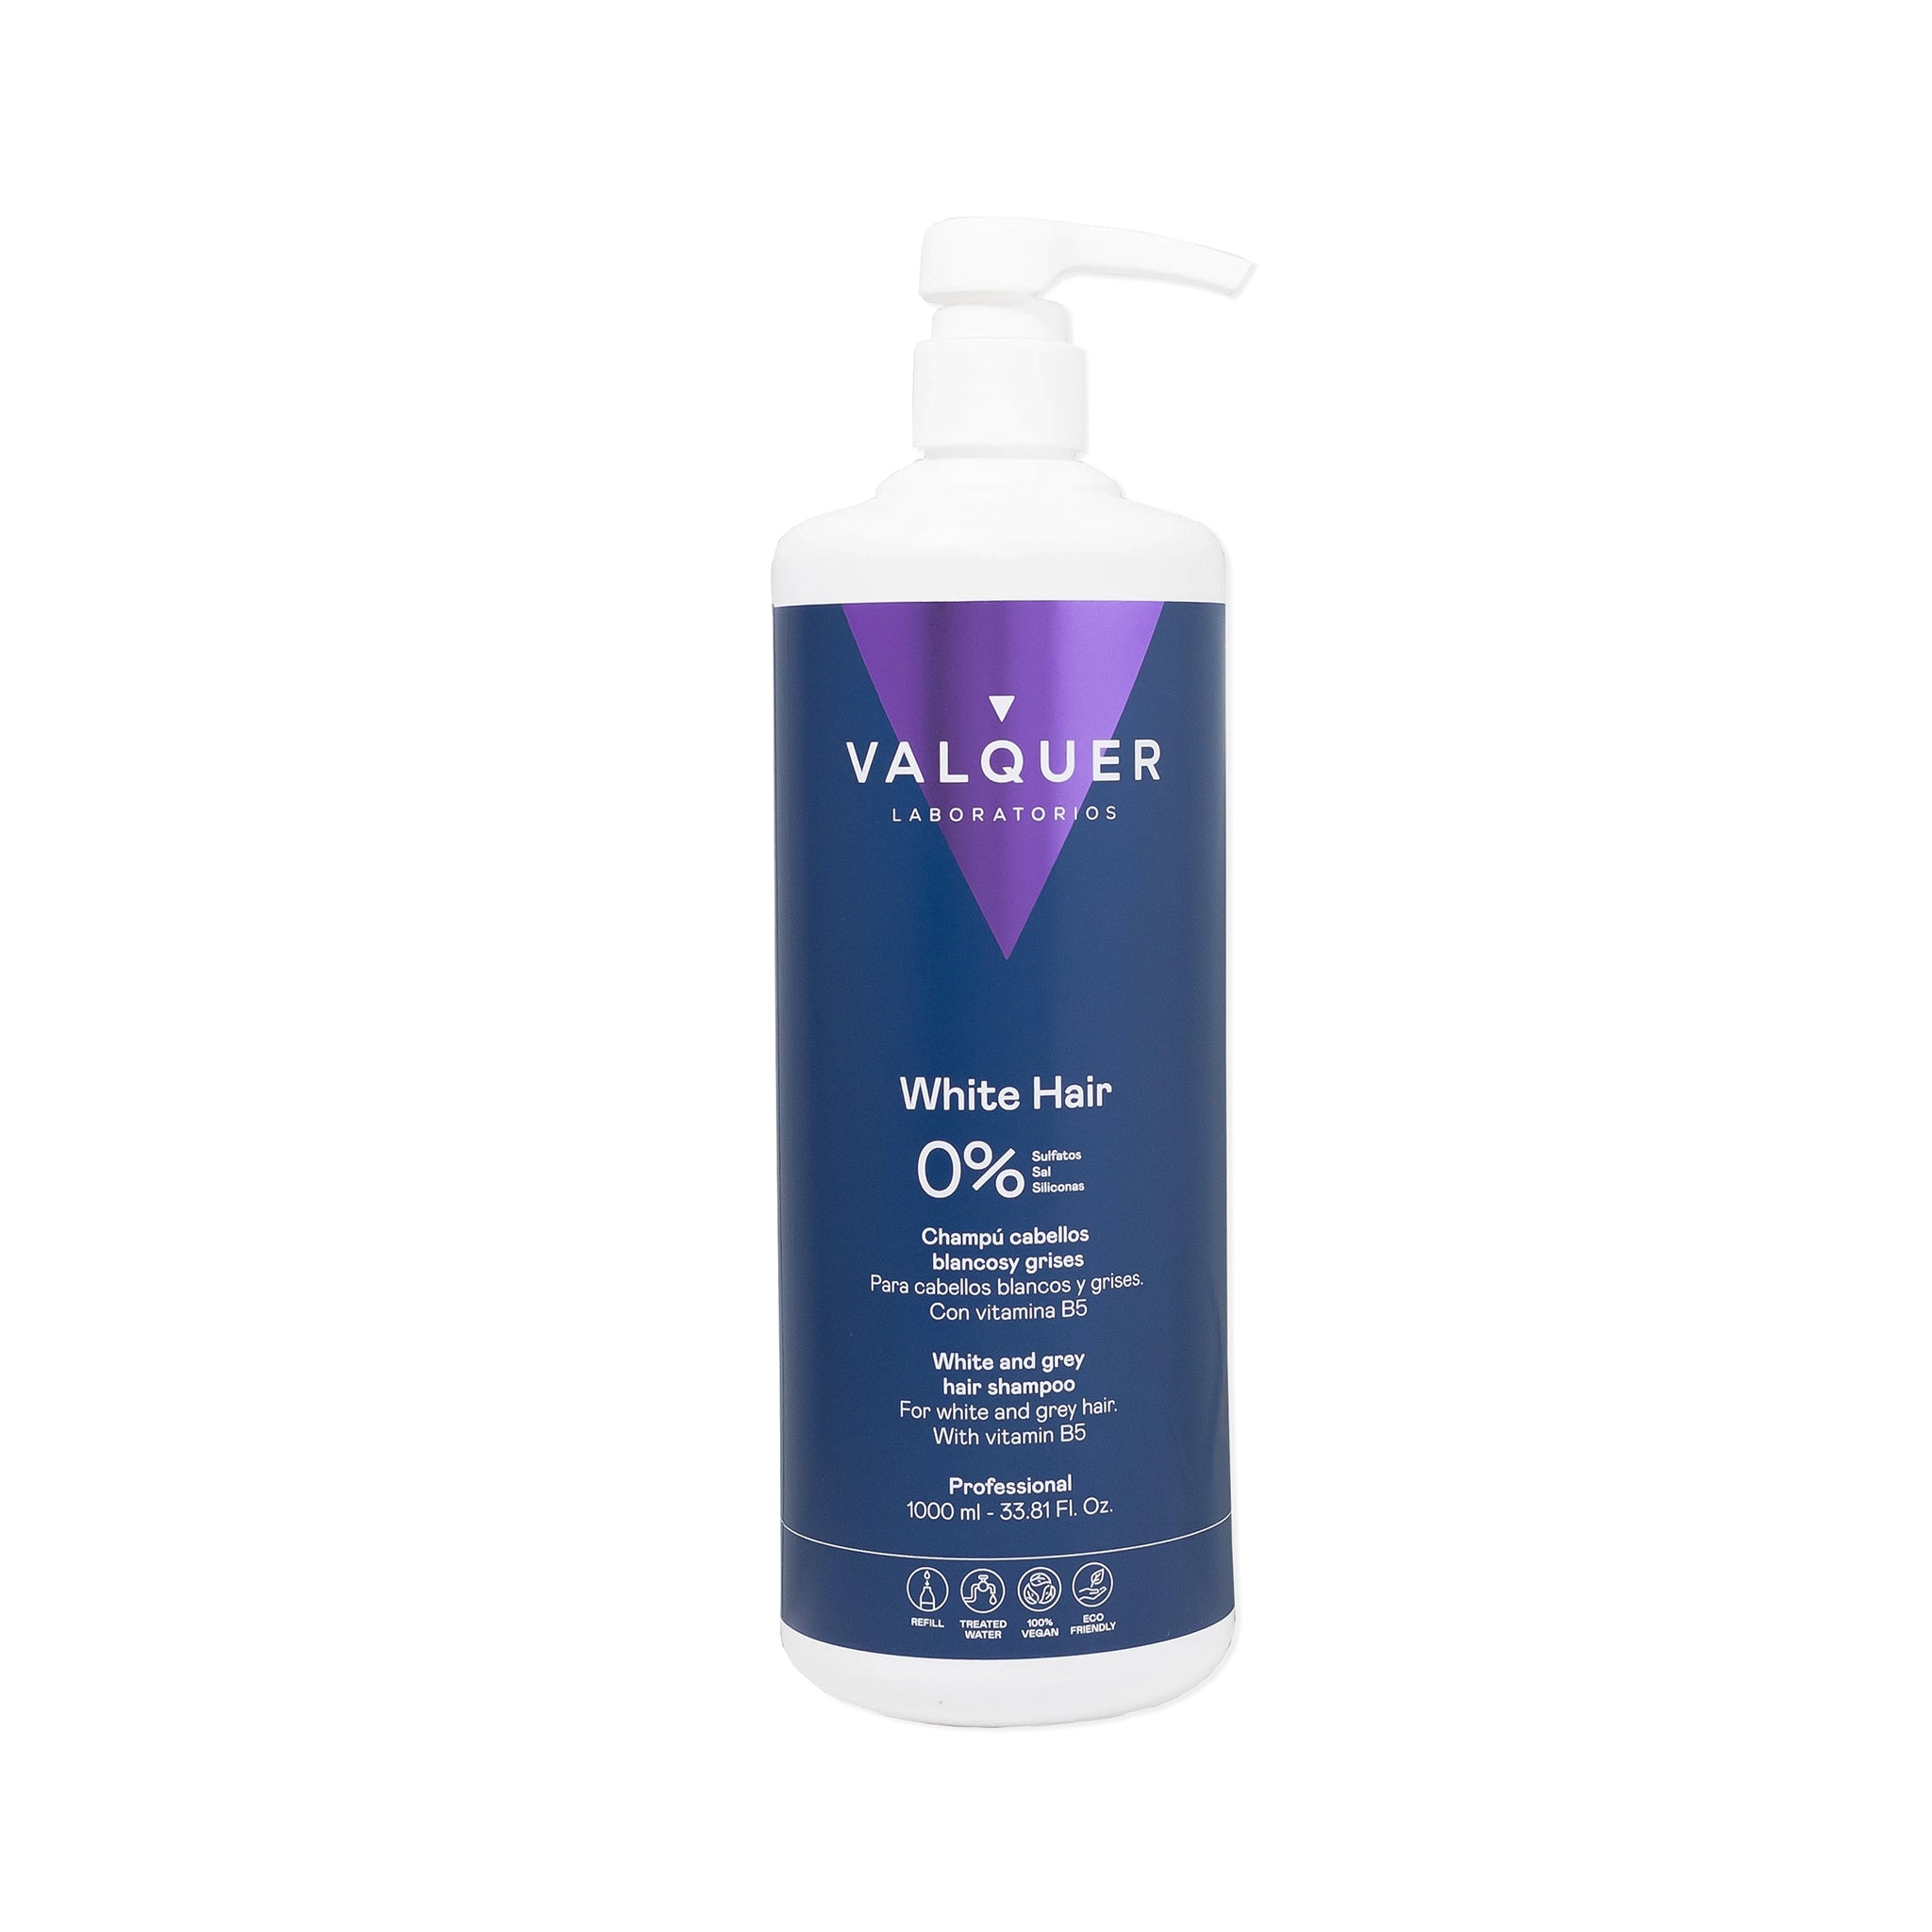 White and Gray Hair Shampoo - 0% Sulfate Free